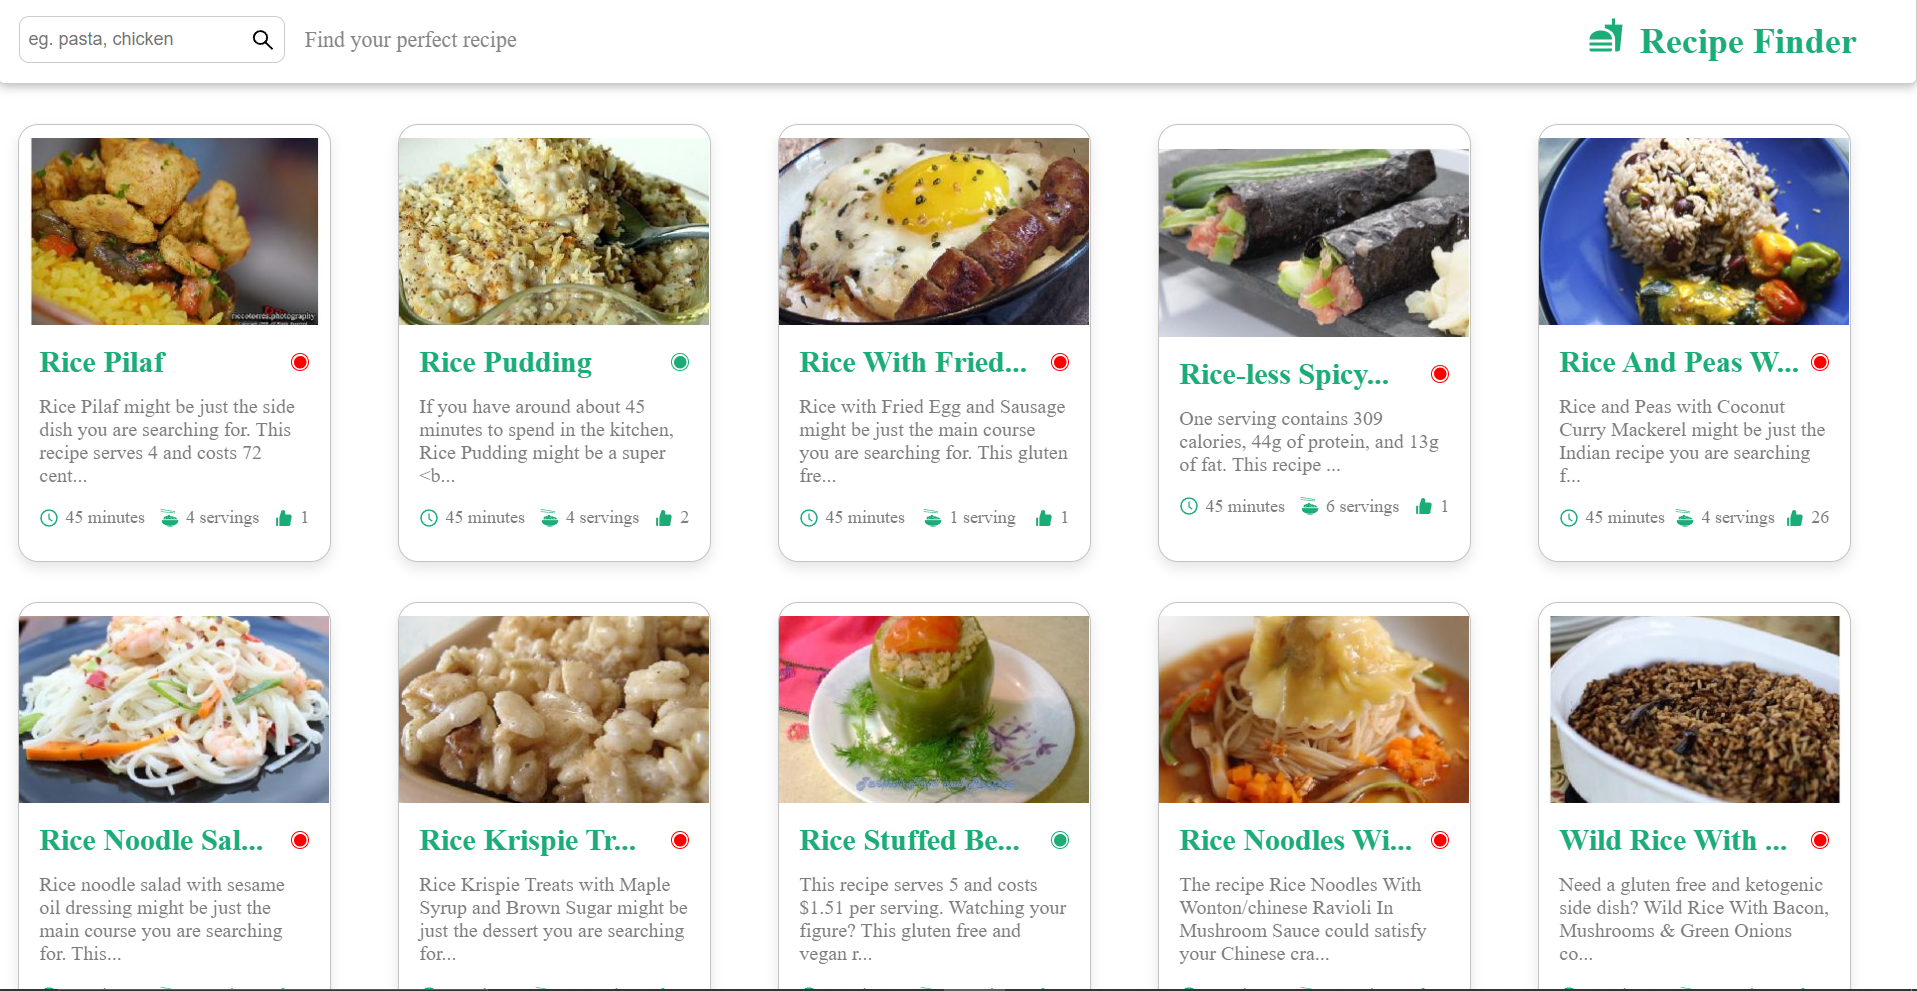 Recipe finder home page